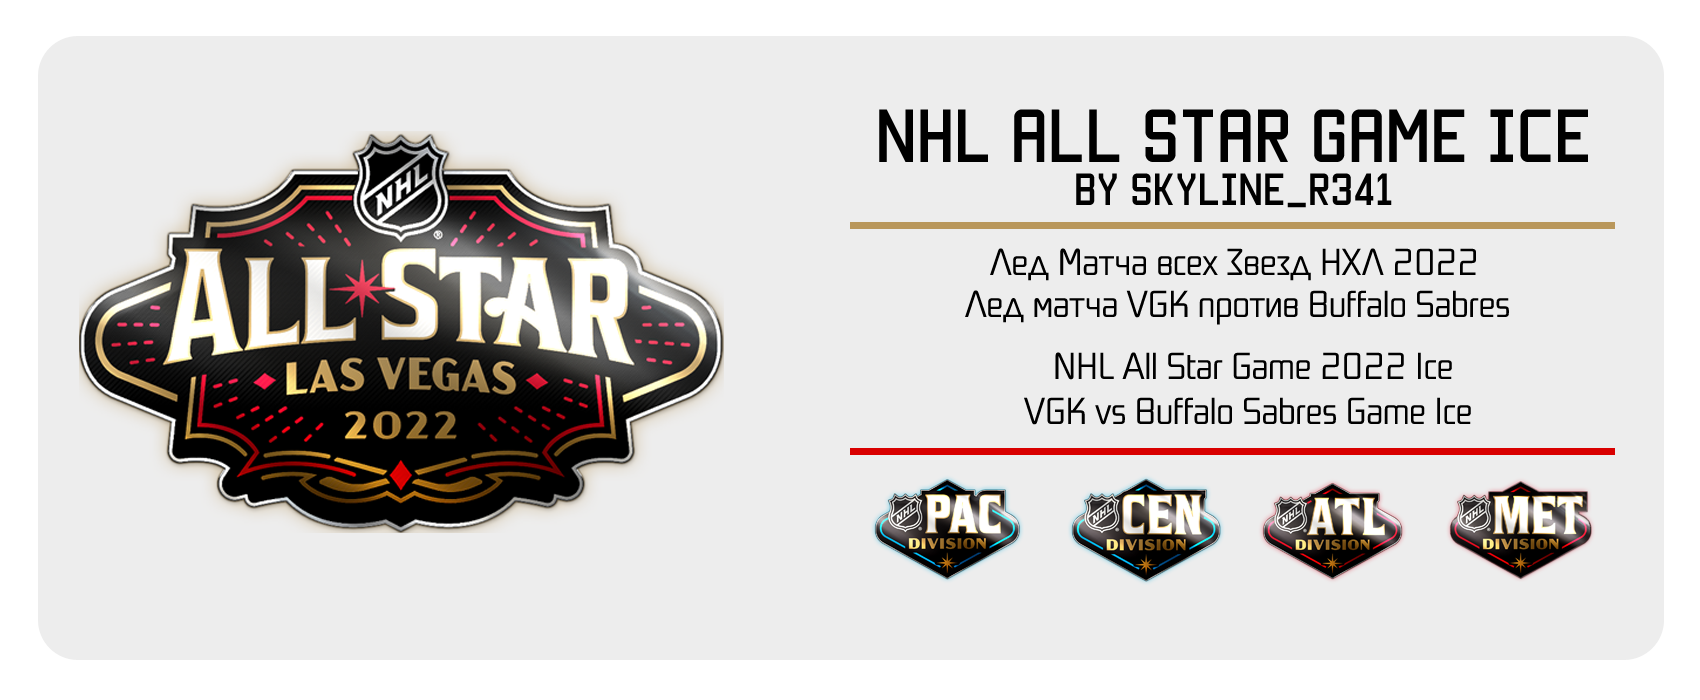 NHL All Star Game 2022 Ice